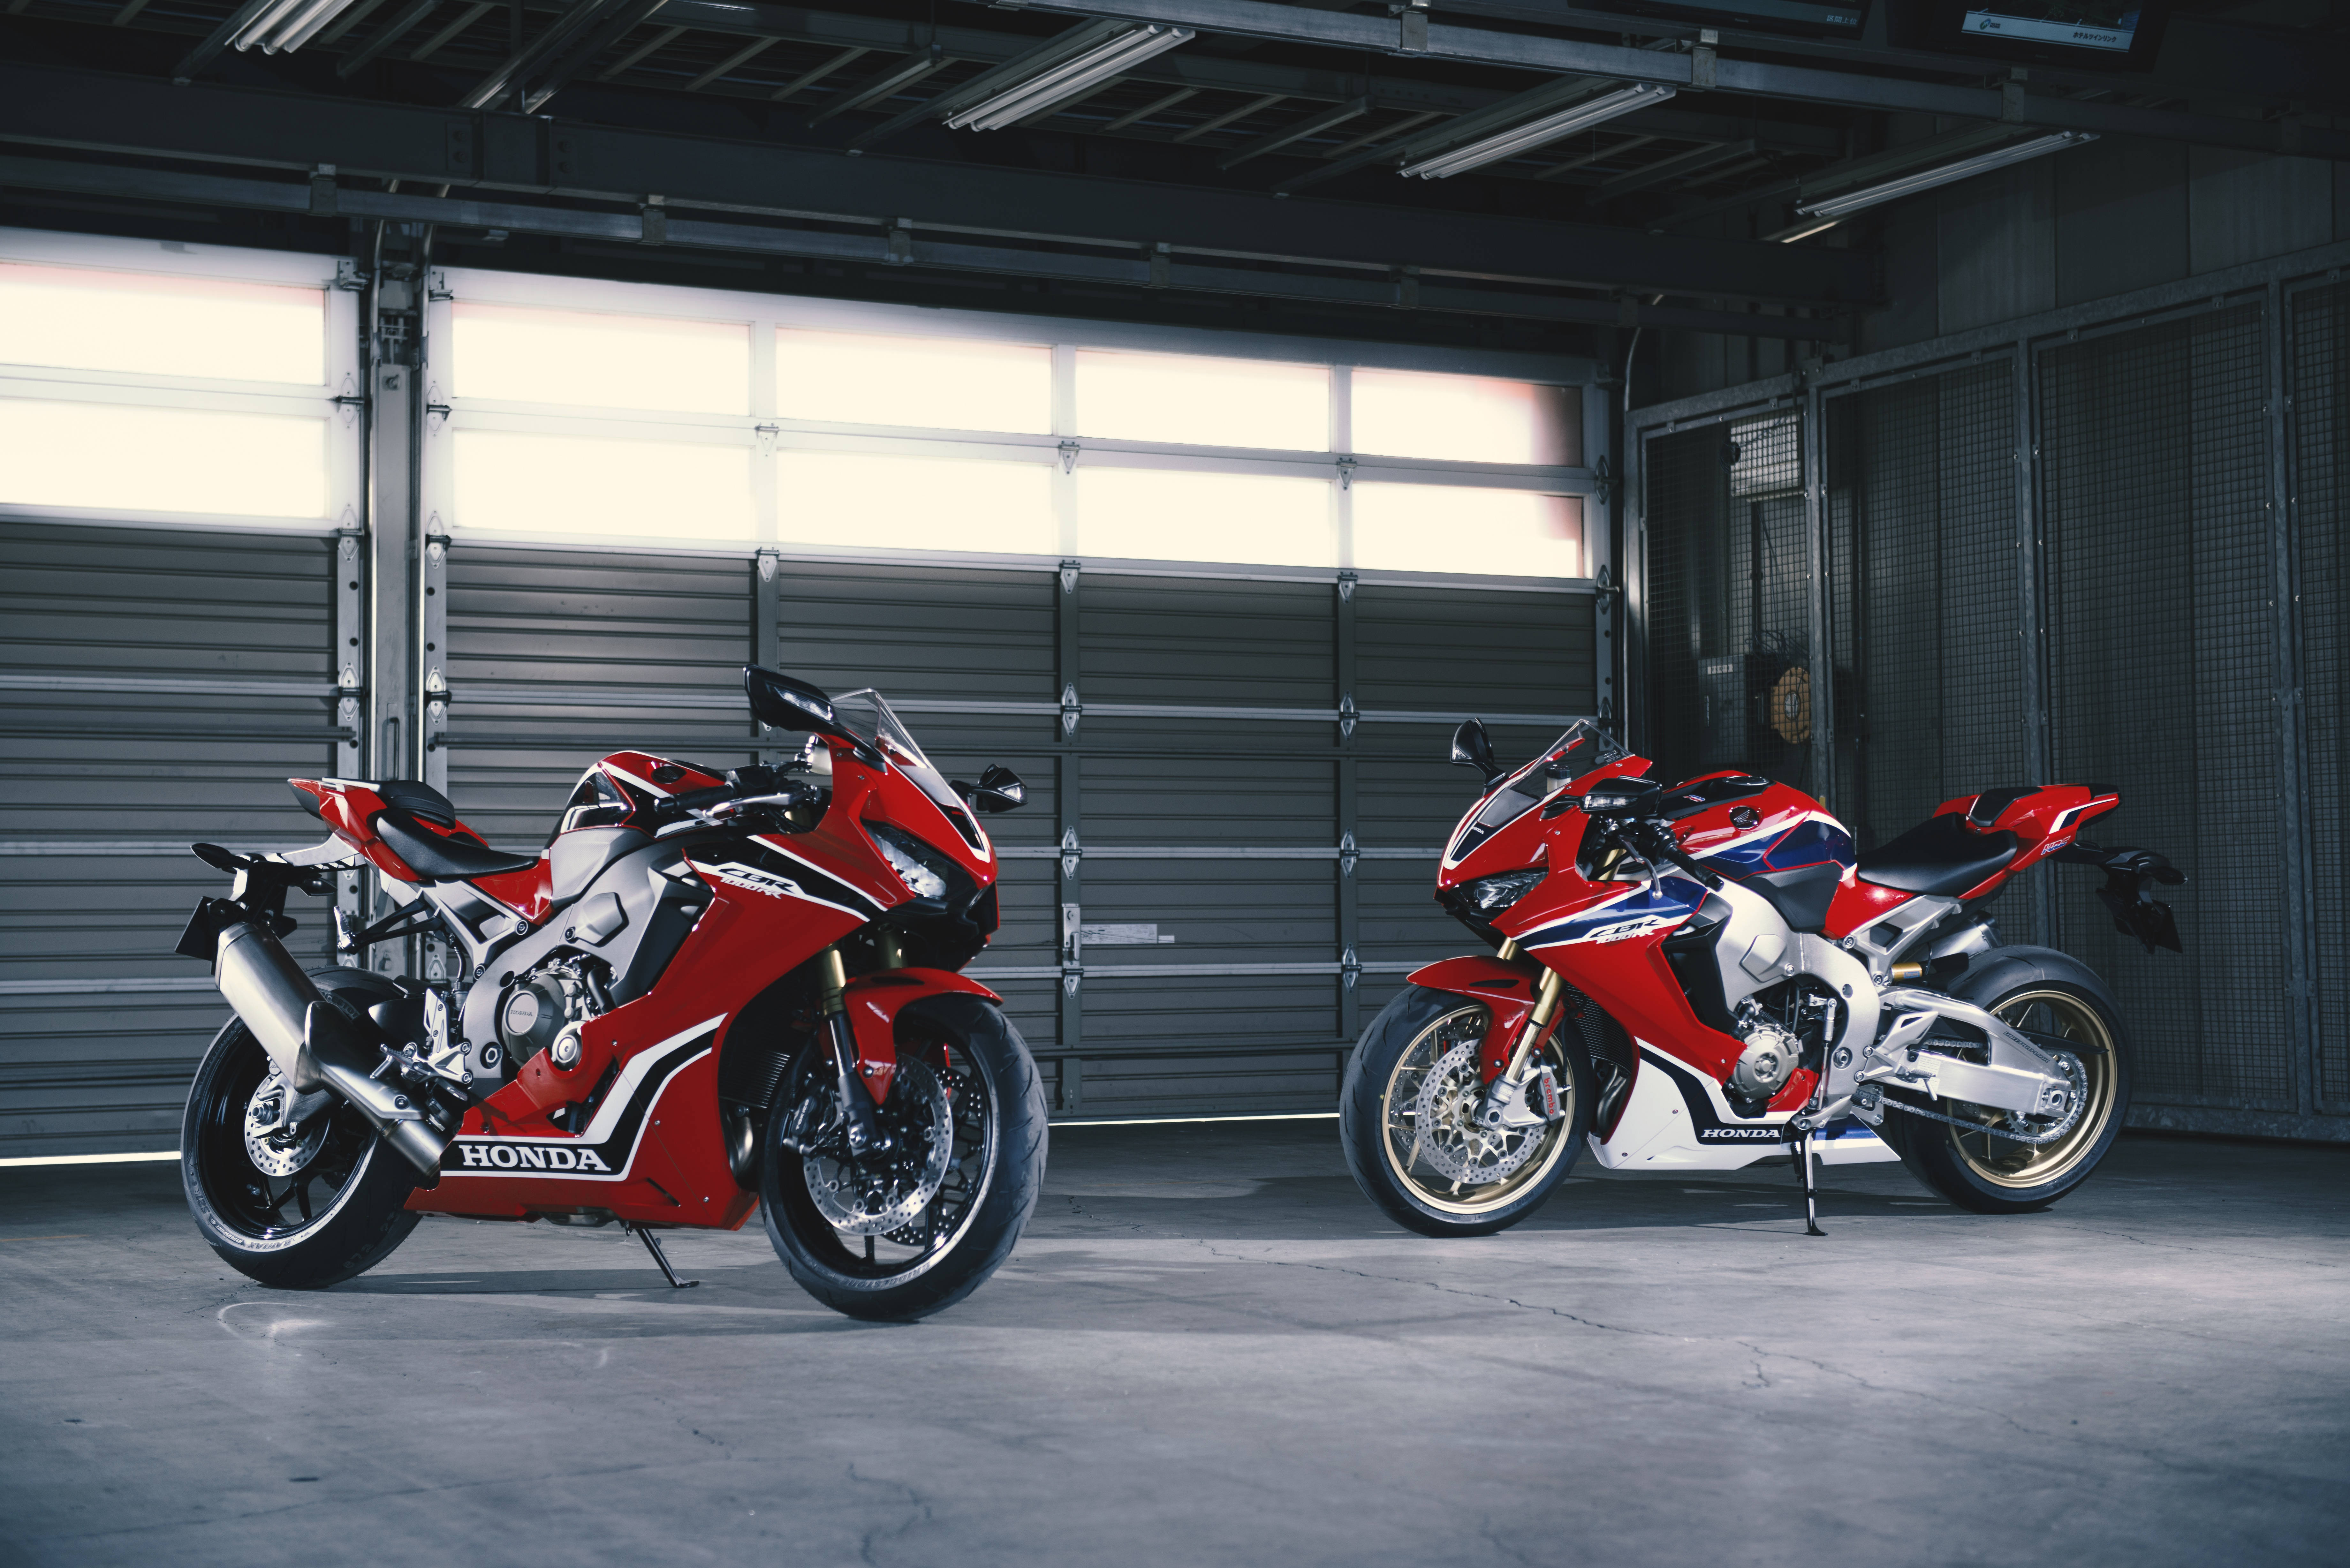 Two Red Honda 1920x1080 Motorcycle Wallpaper